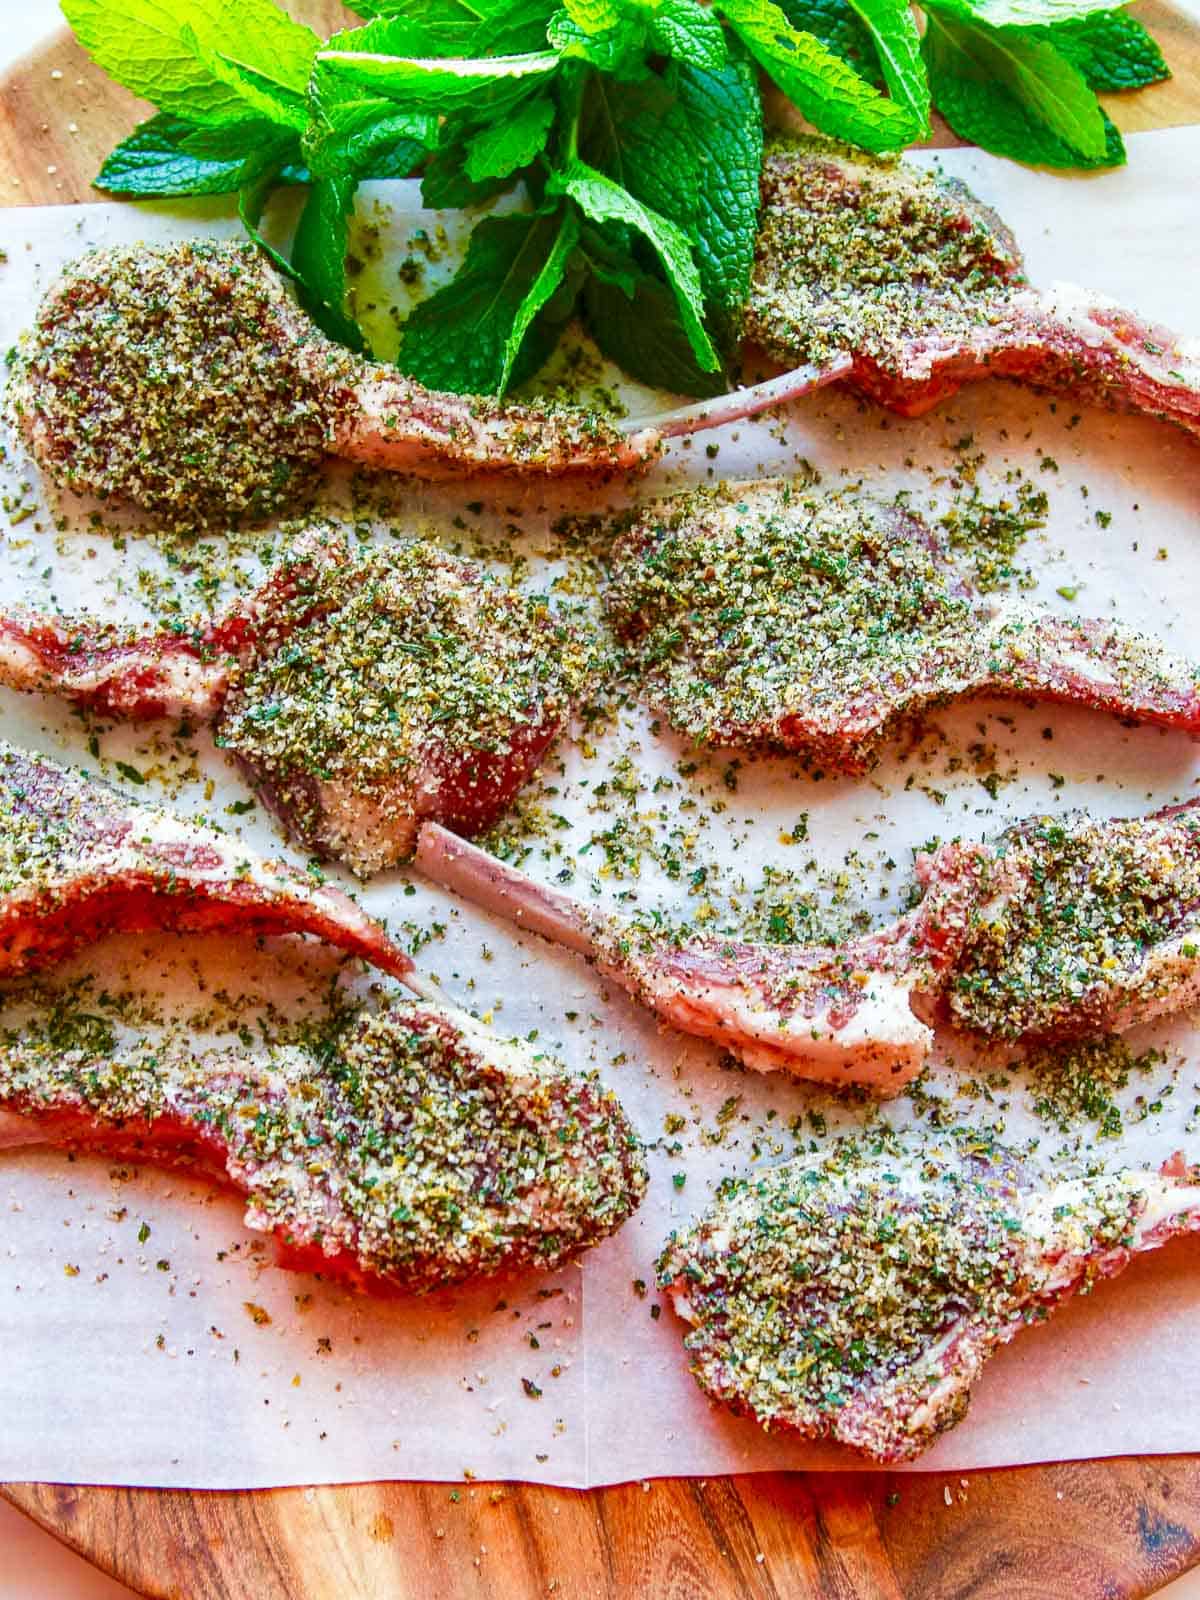 Grilled Lamb Chops Recipe (Perfect Every Time!)